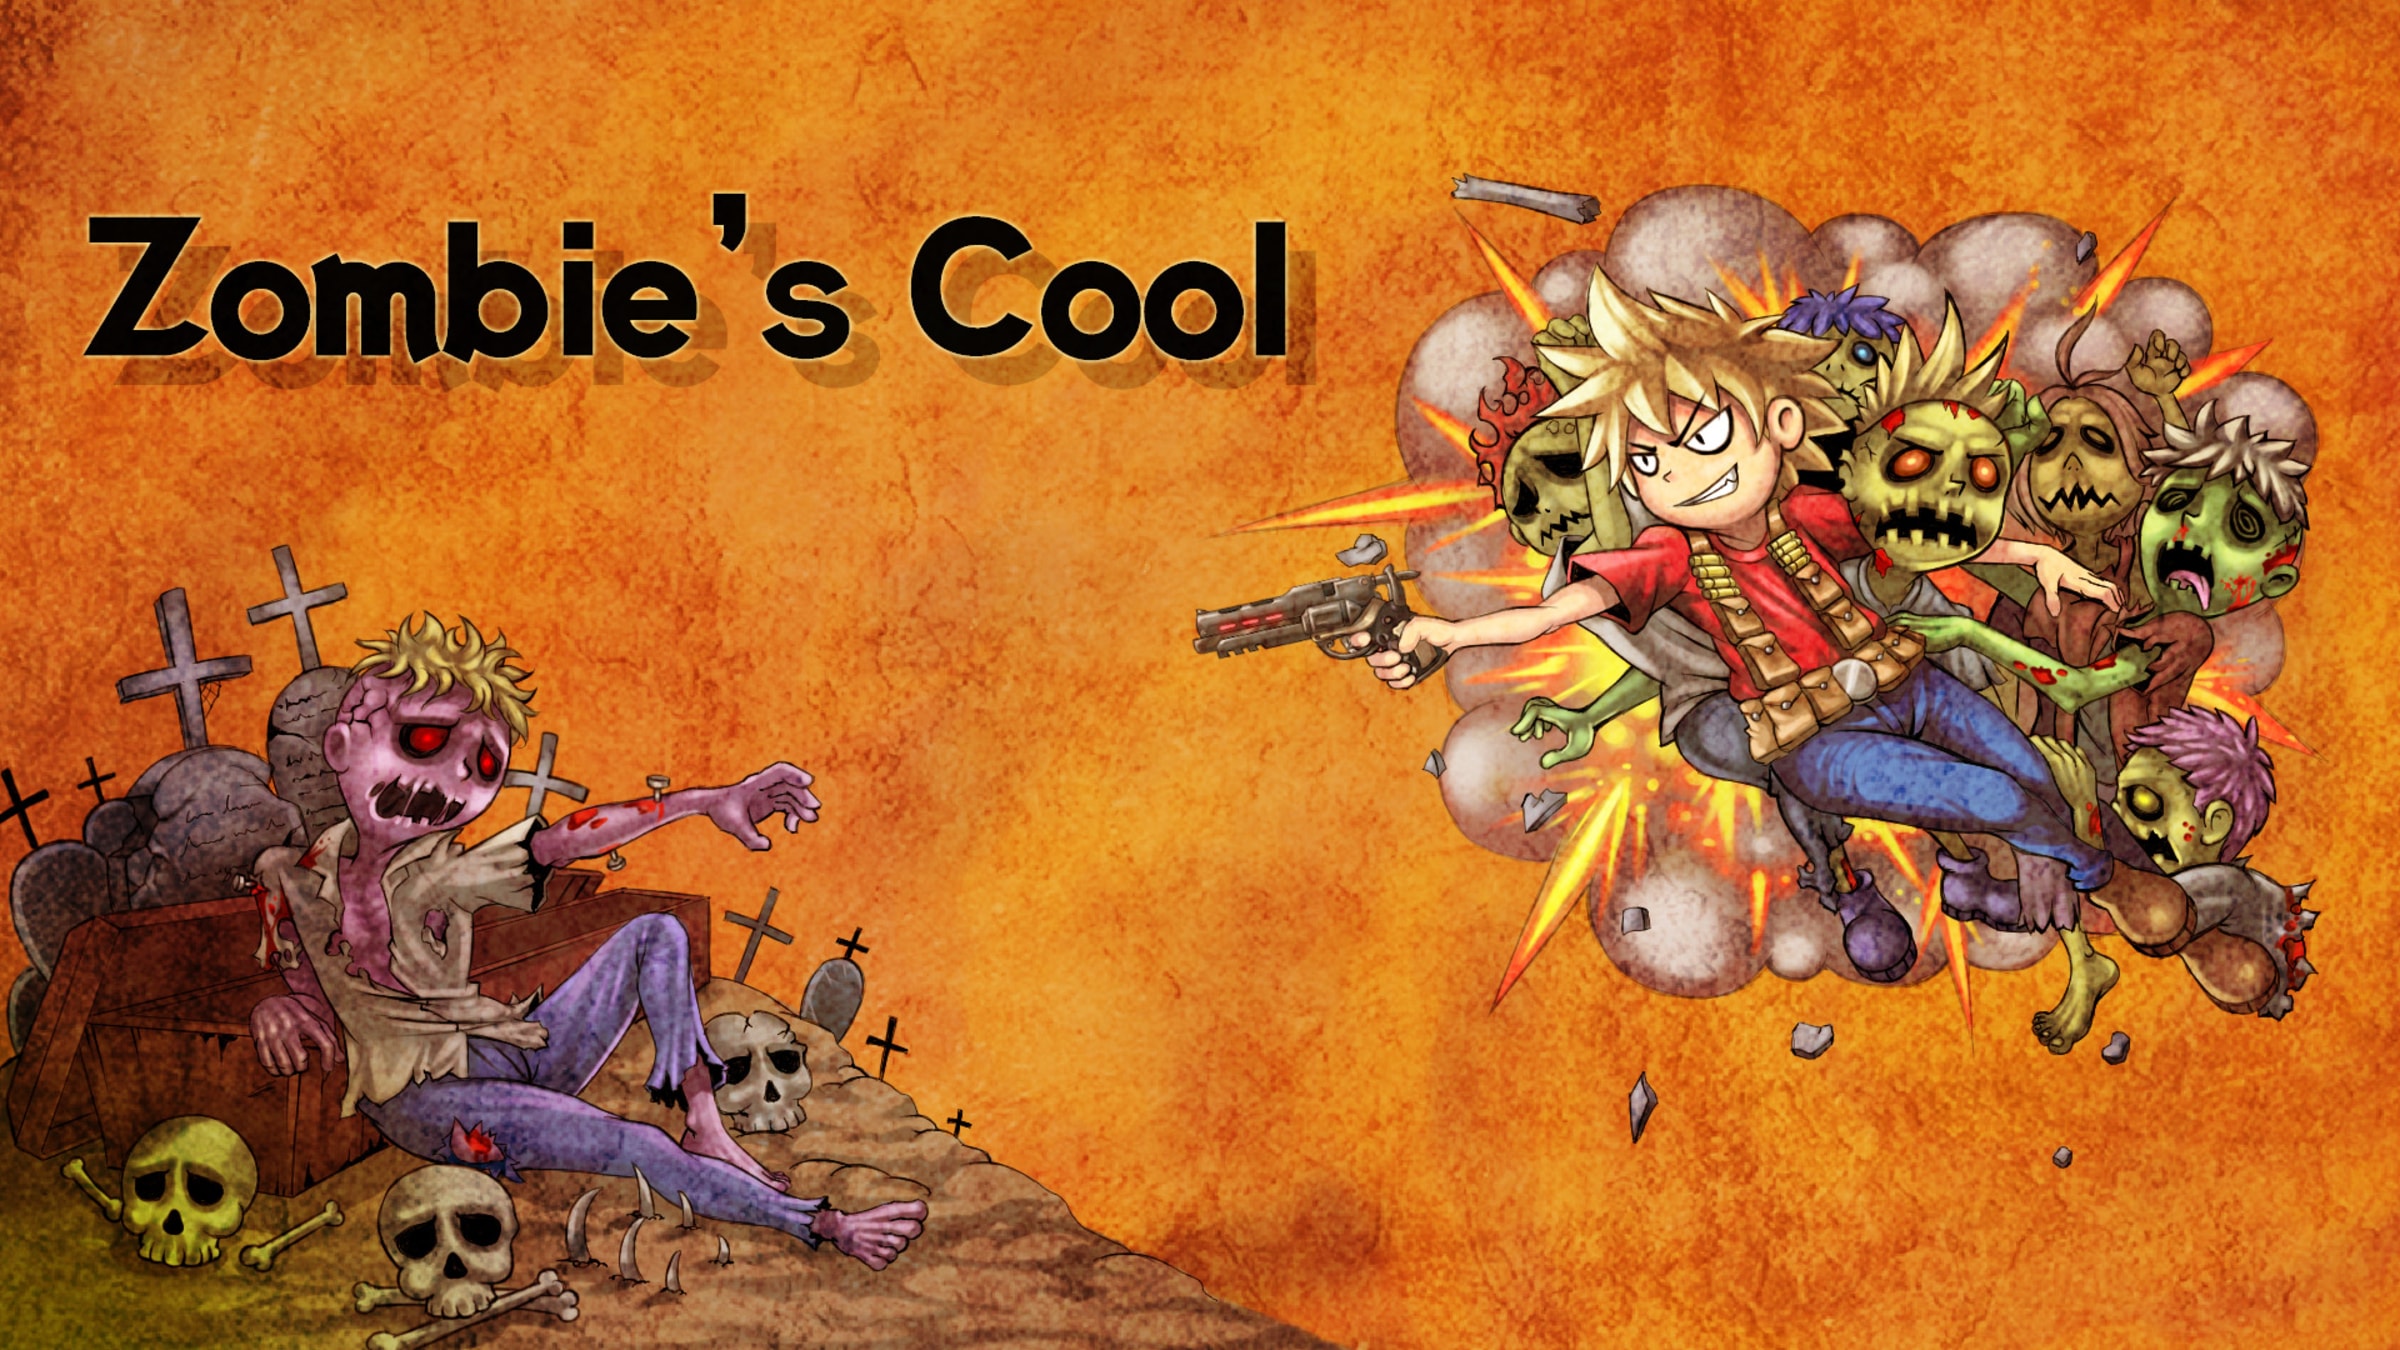 Zombie's Cool for Nintendo Switch - Nintendo Official Site